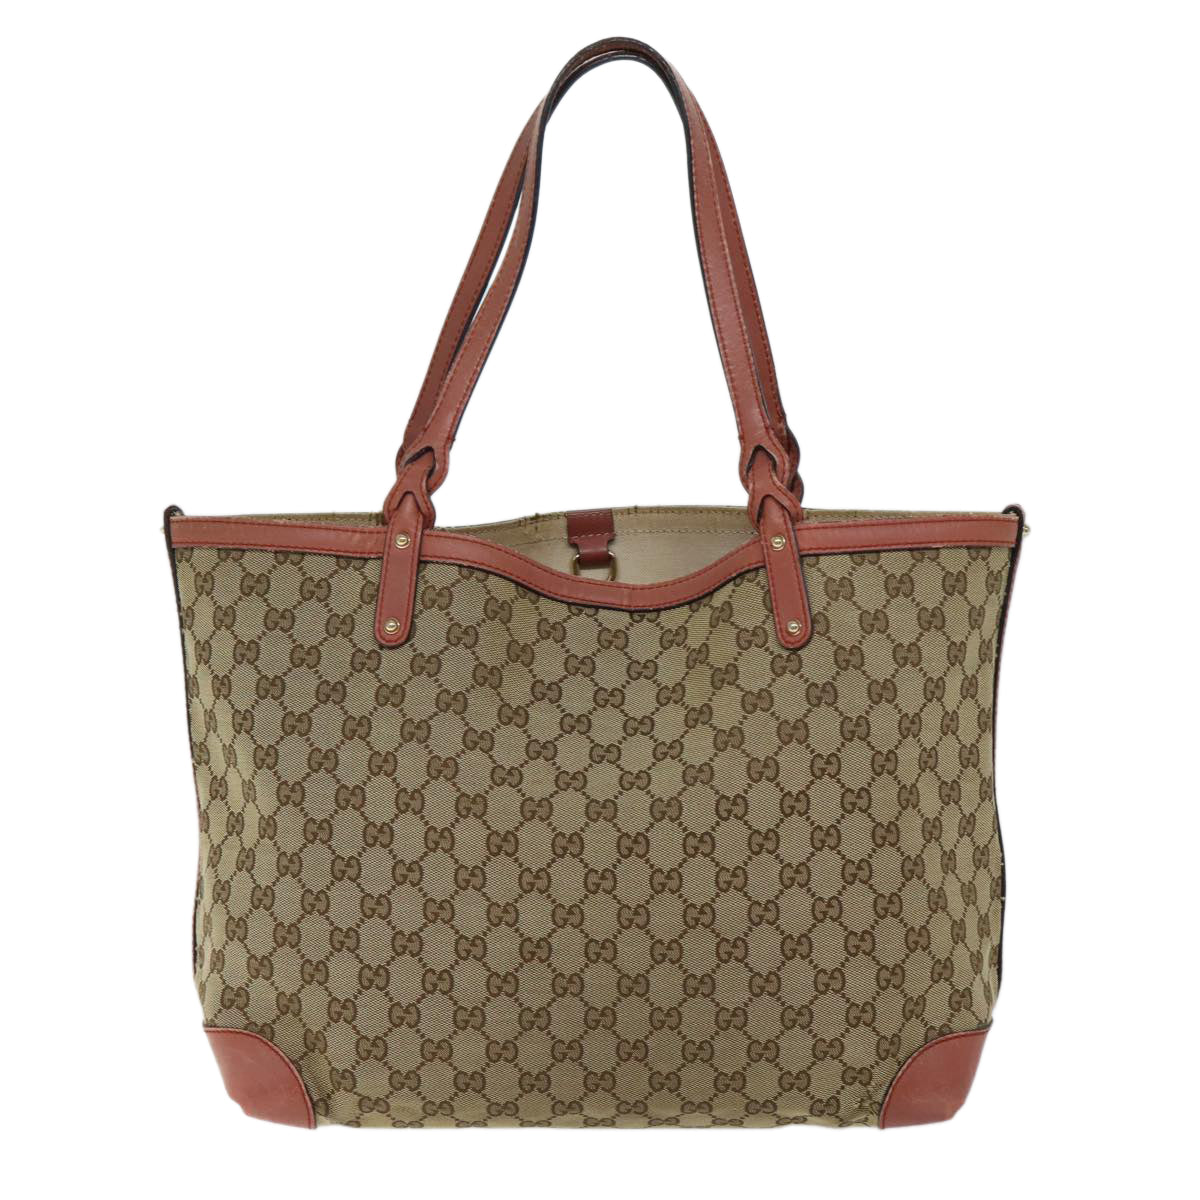 GUCCI GG Canvas Tote Bag Beige 247209 Auth bs13573